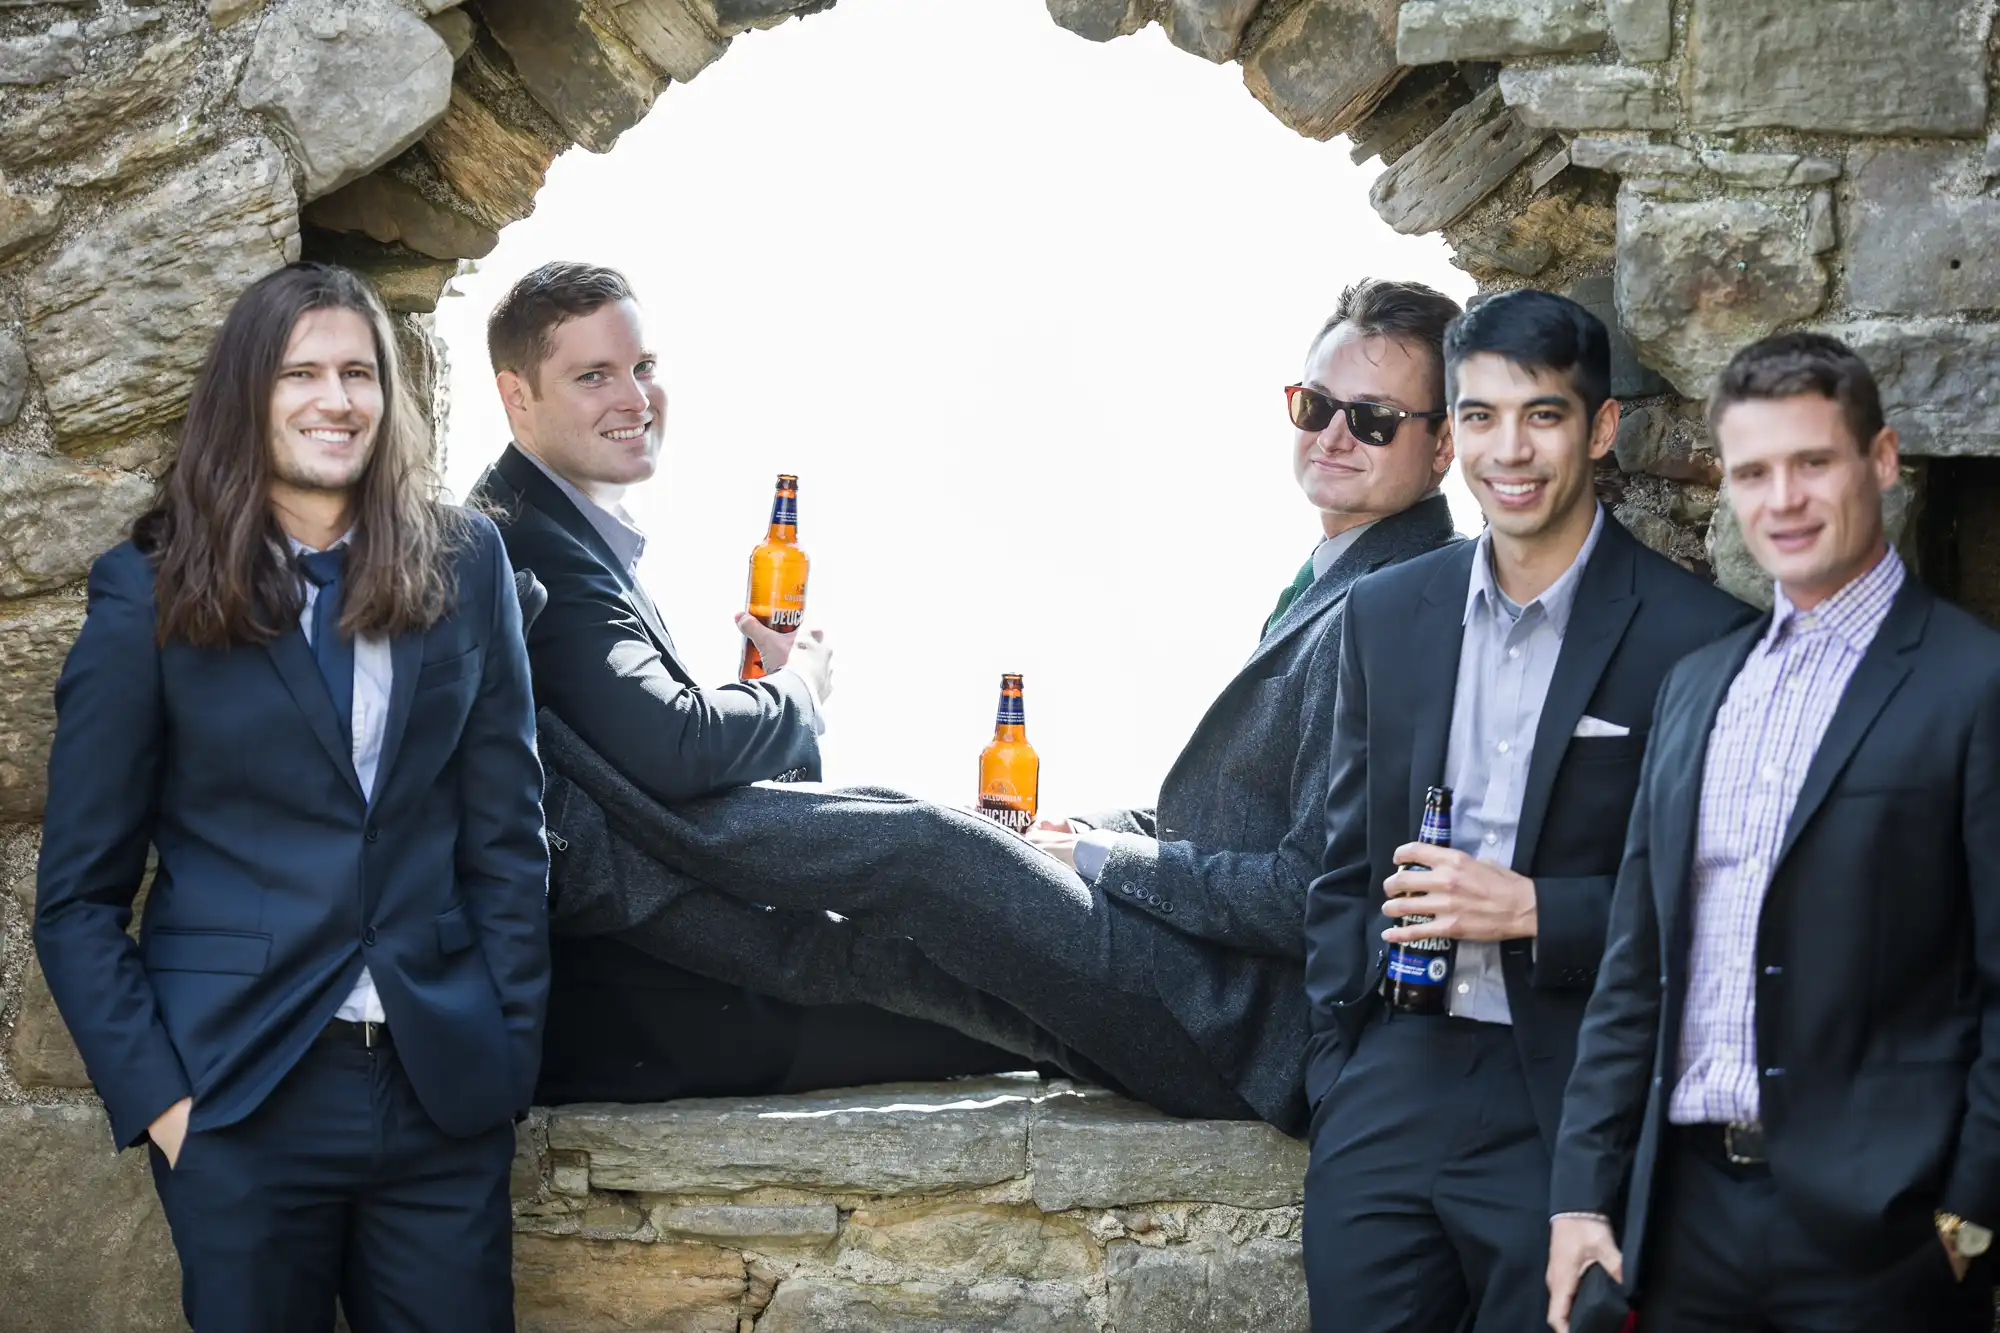 Five men in suits stand and sit by a stone archway, holding bottles of beer and smiling.